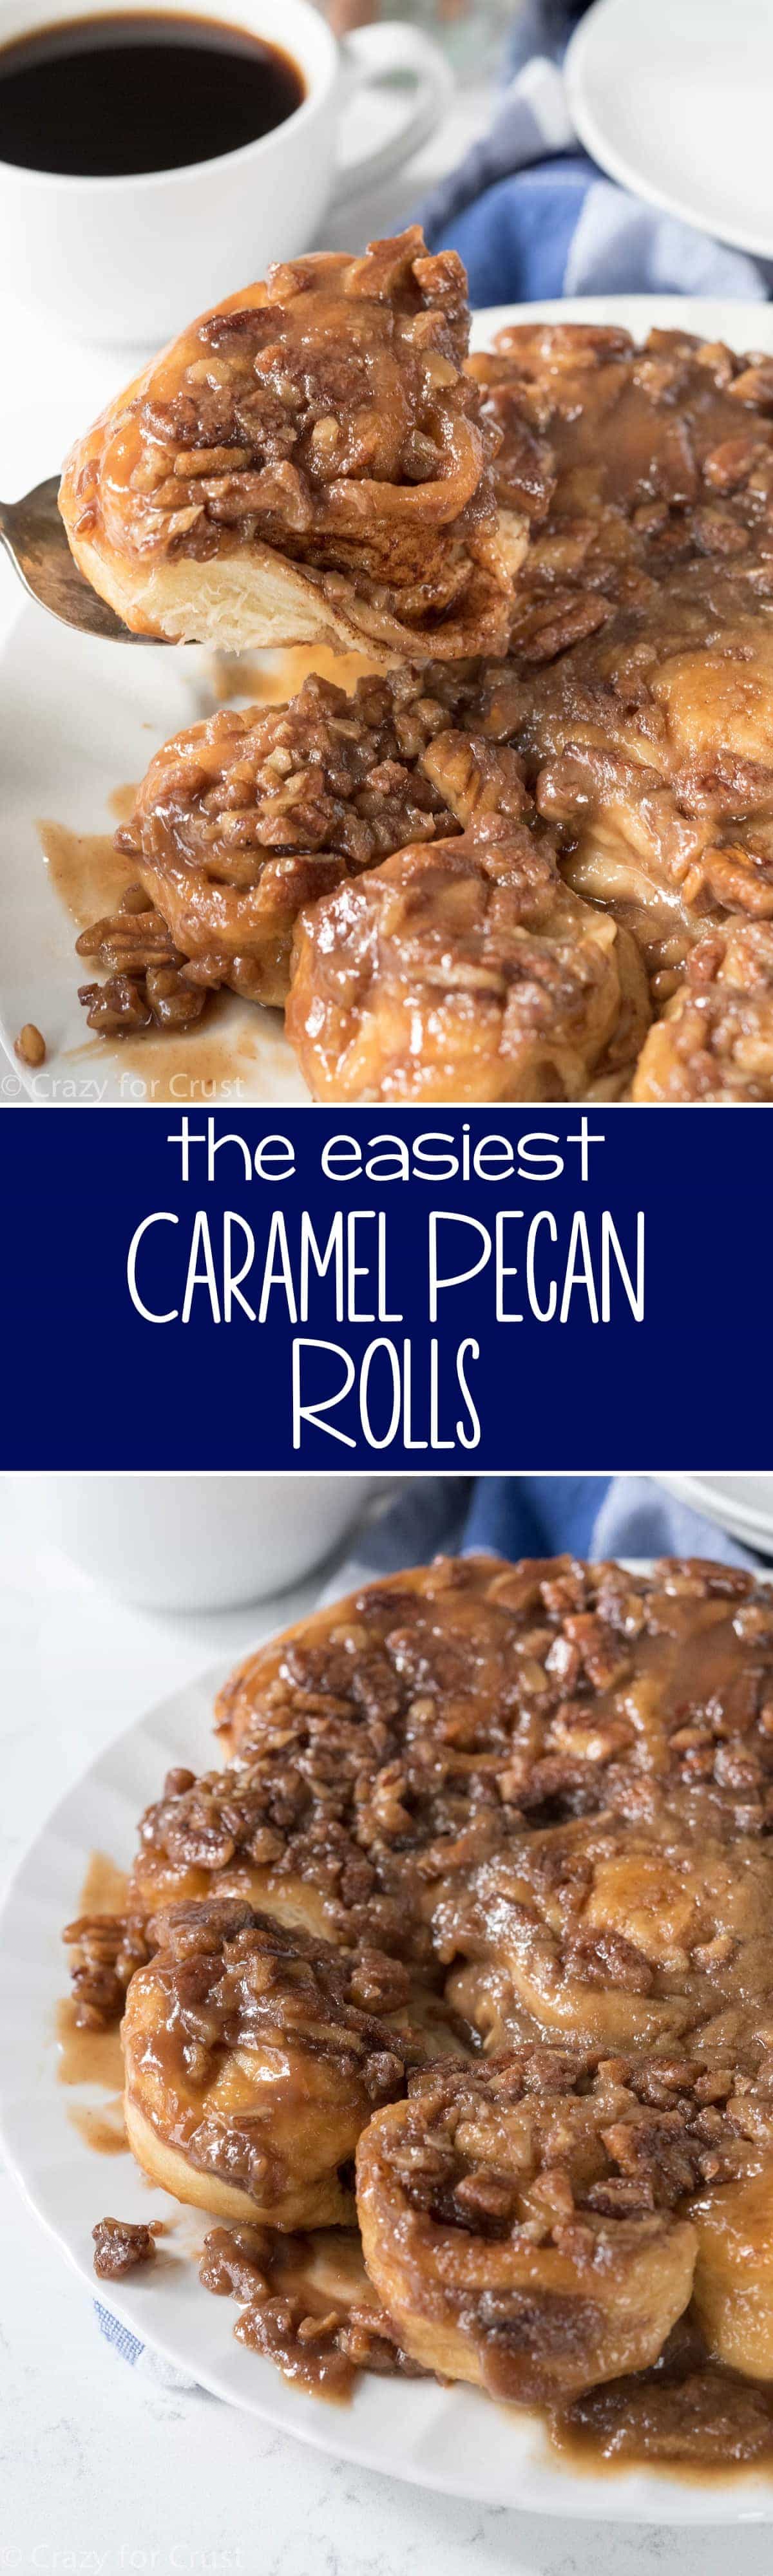 These Easy Caramel Pecan Rolls are the perfect holiday breakfast. Easy, fast, no yeast and no rise, they're foolproof sticky buns without all the work!